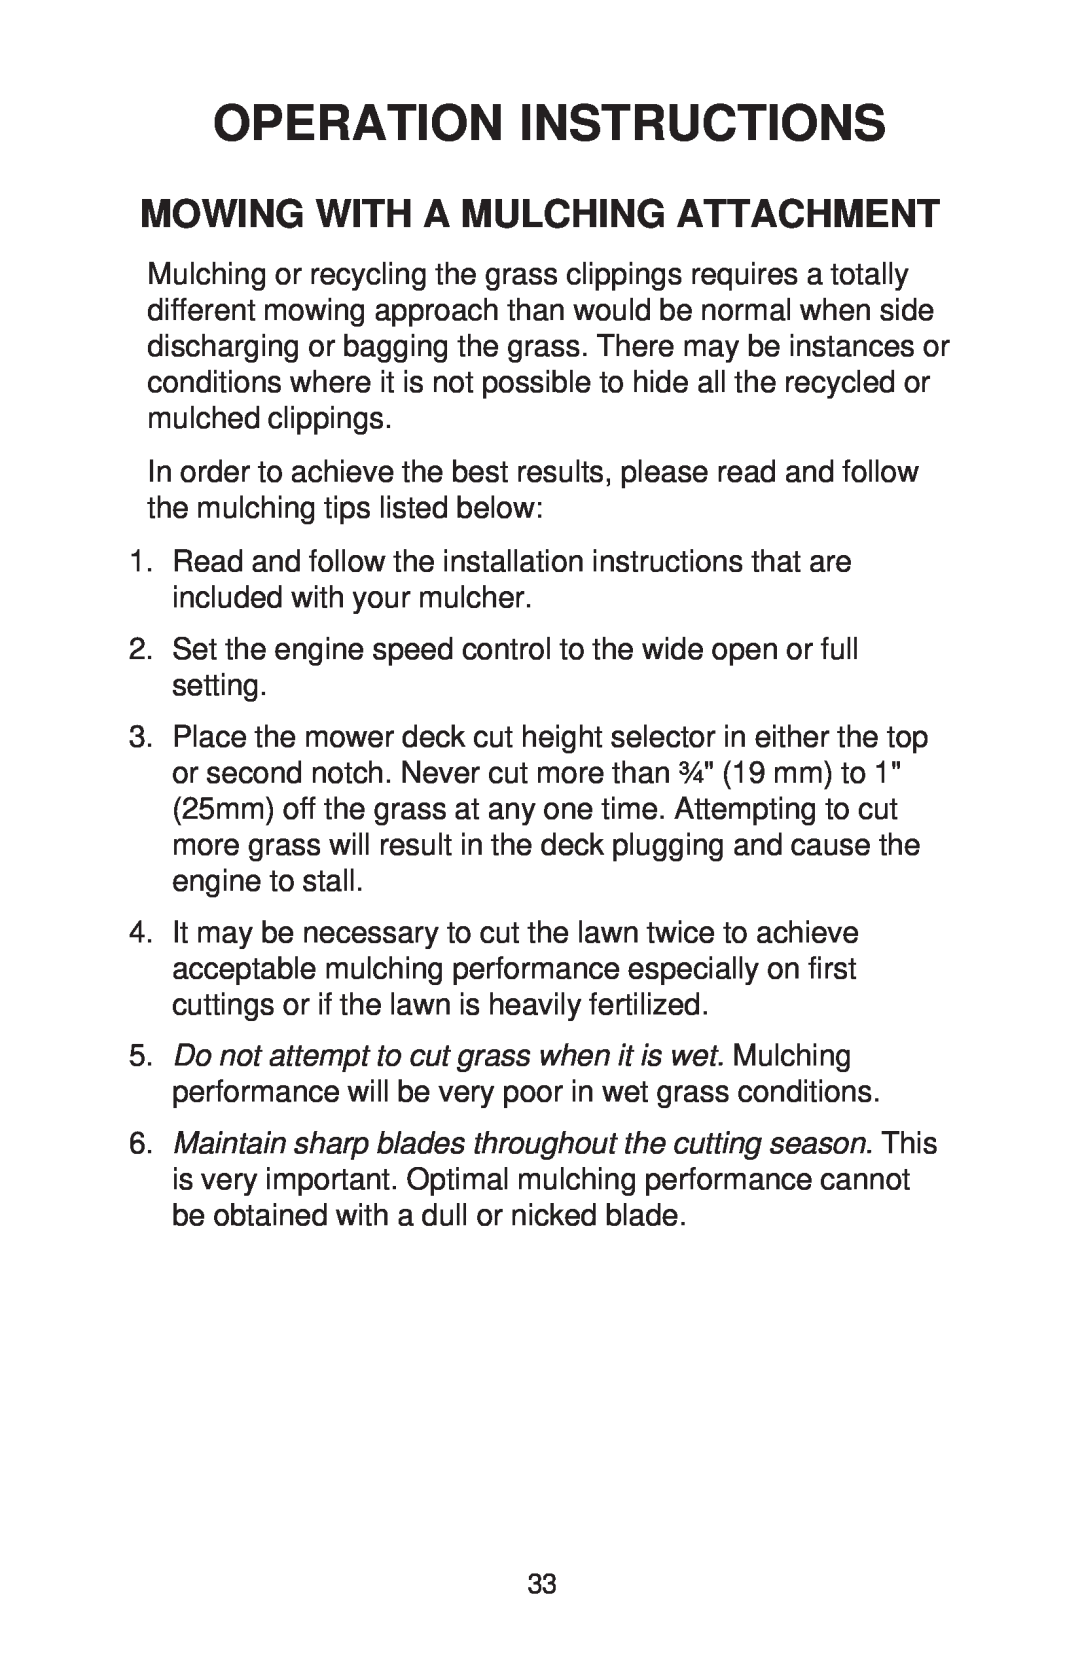 Dixon RAM 44, BS, BS, HON, KOH, KAW, HON manual Mowing With A Mulching Attachment, Operation Instructions 